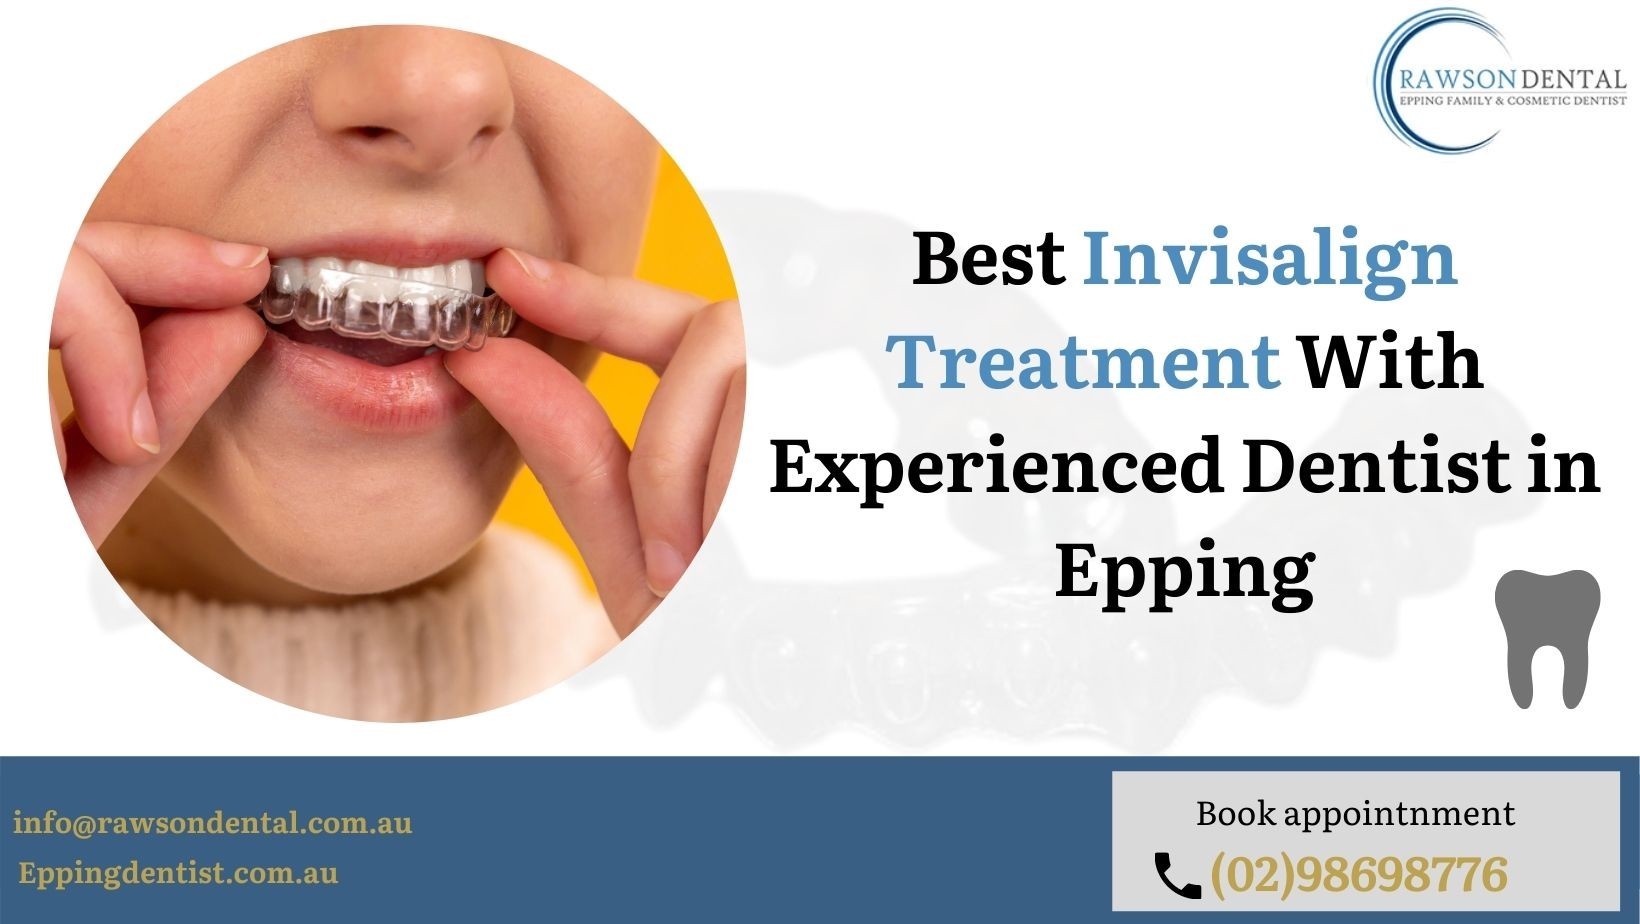 Best Invisalign Treatment With Experienced Dentist in Epping